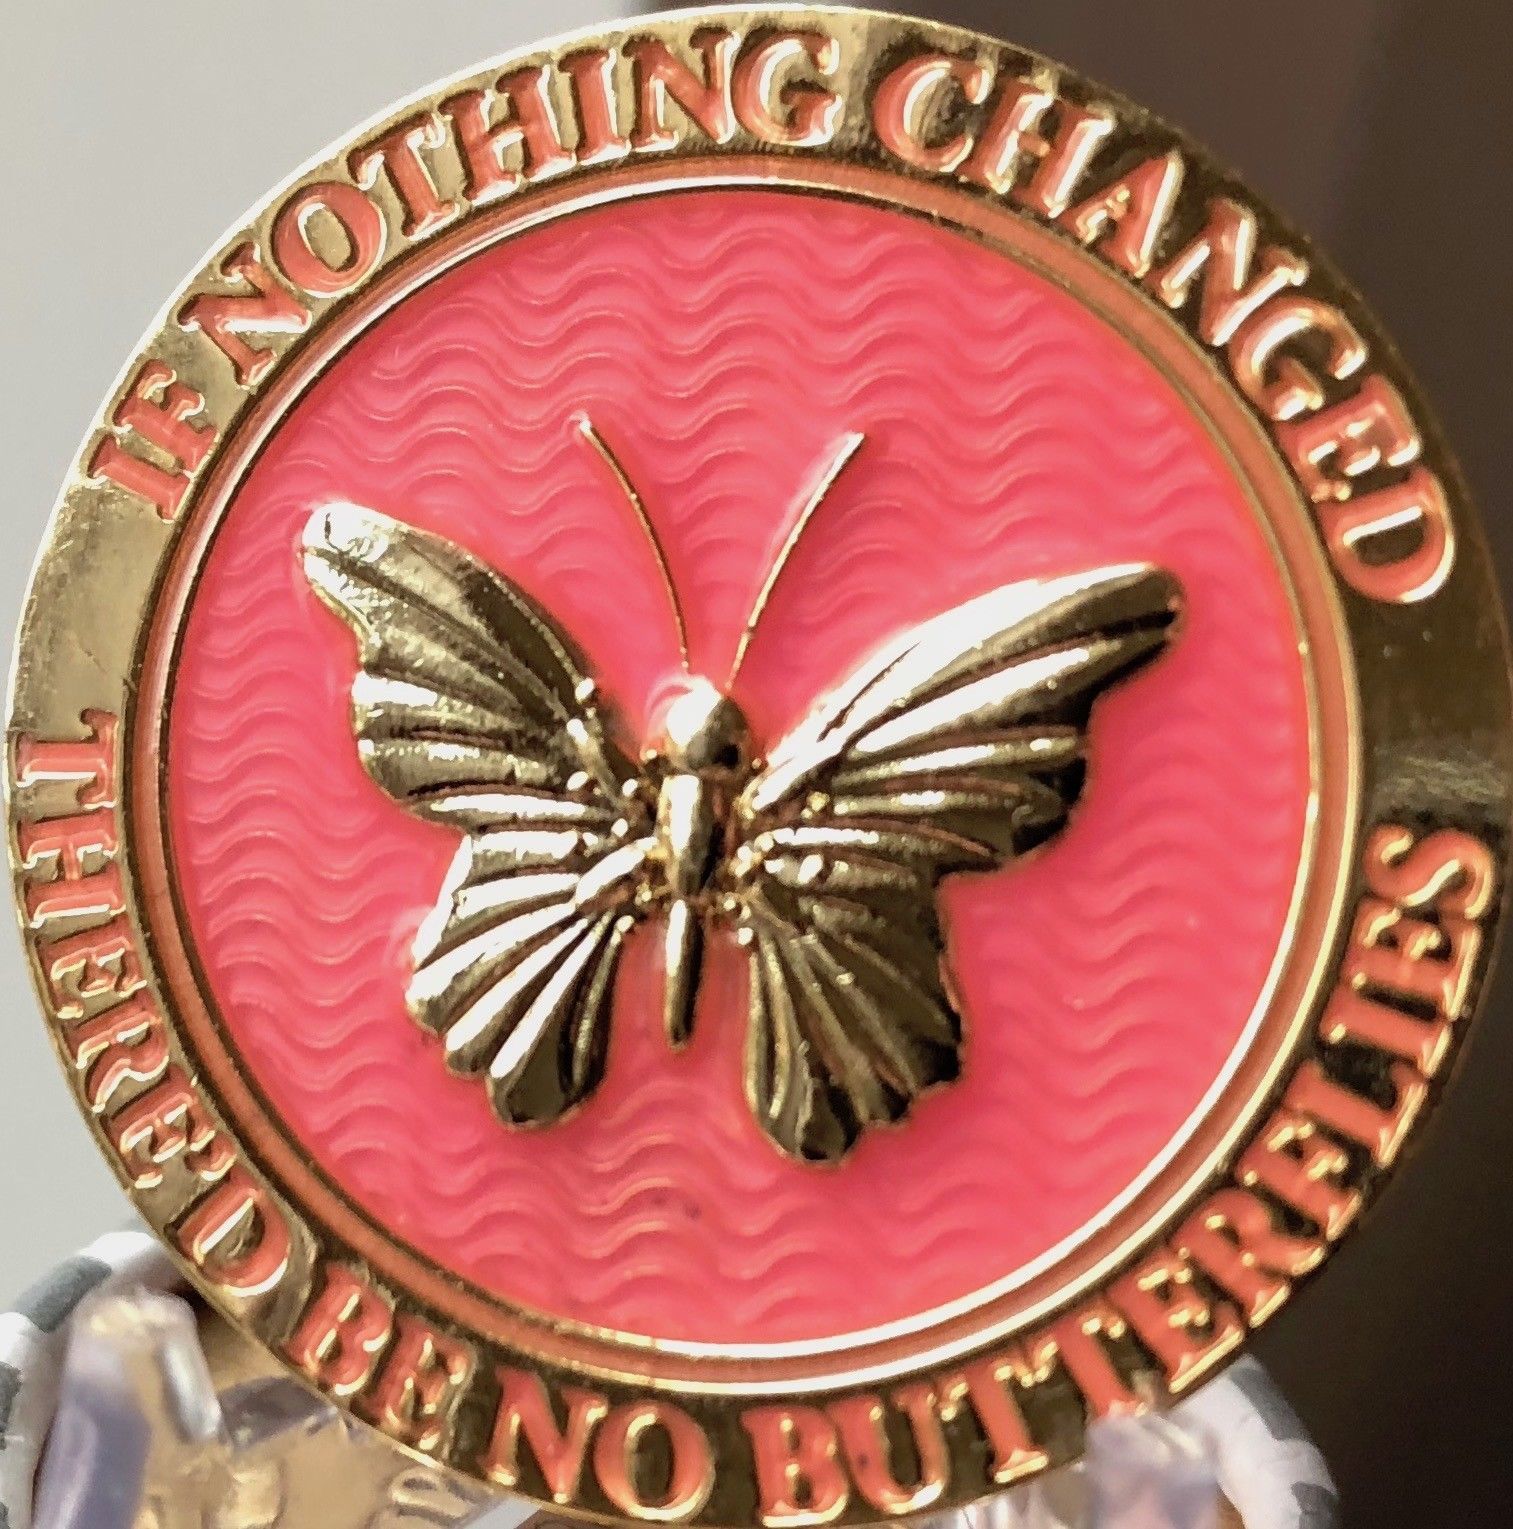 If Nothing Changed There'd Be No Butterflies Reflex Pink Gold Plated Medallion - $17.99